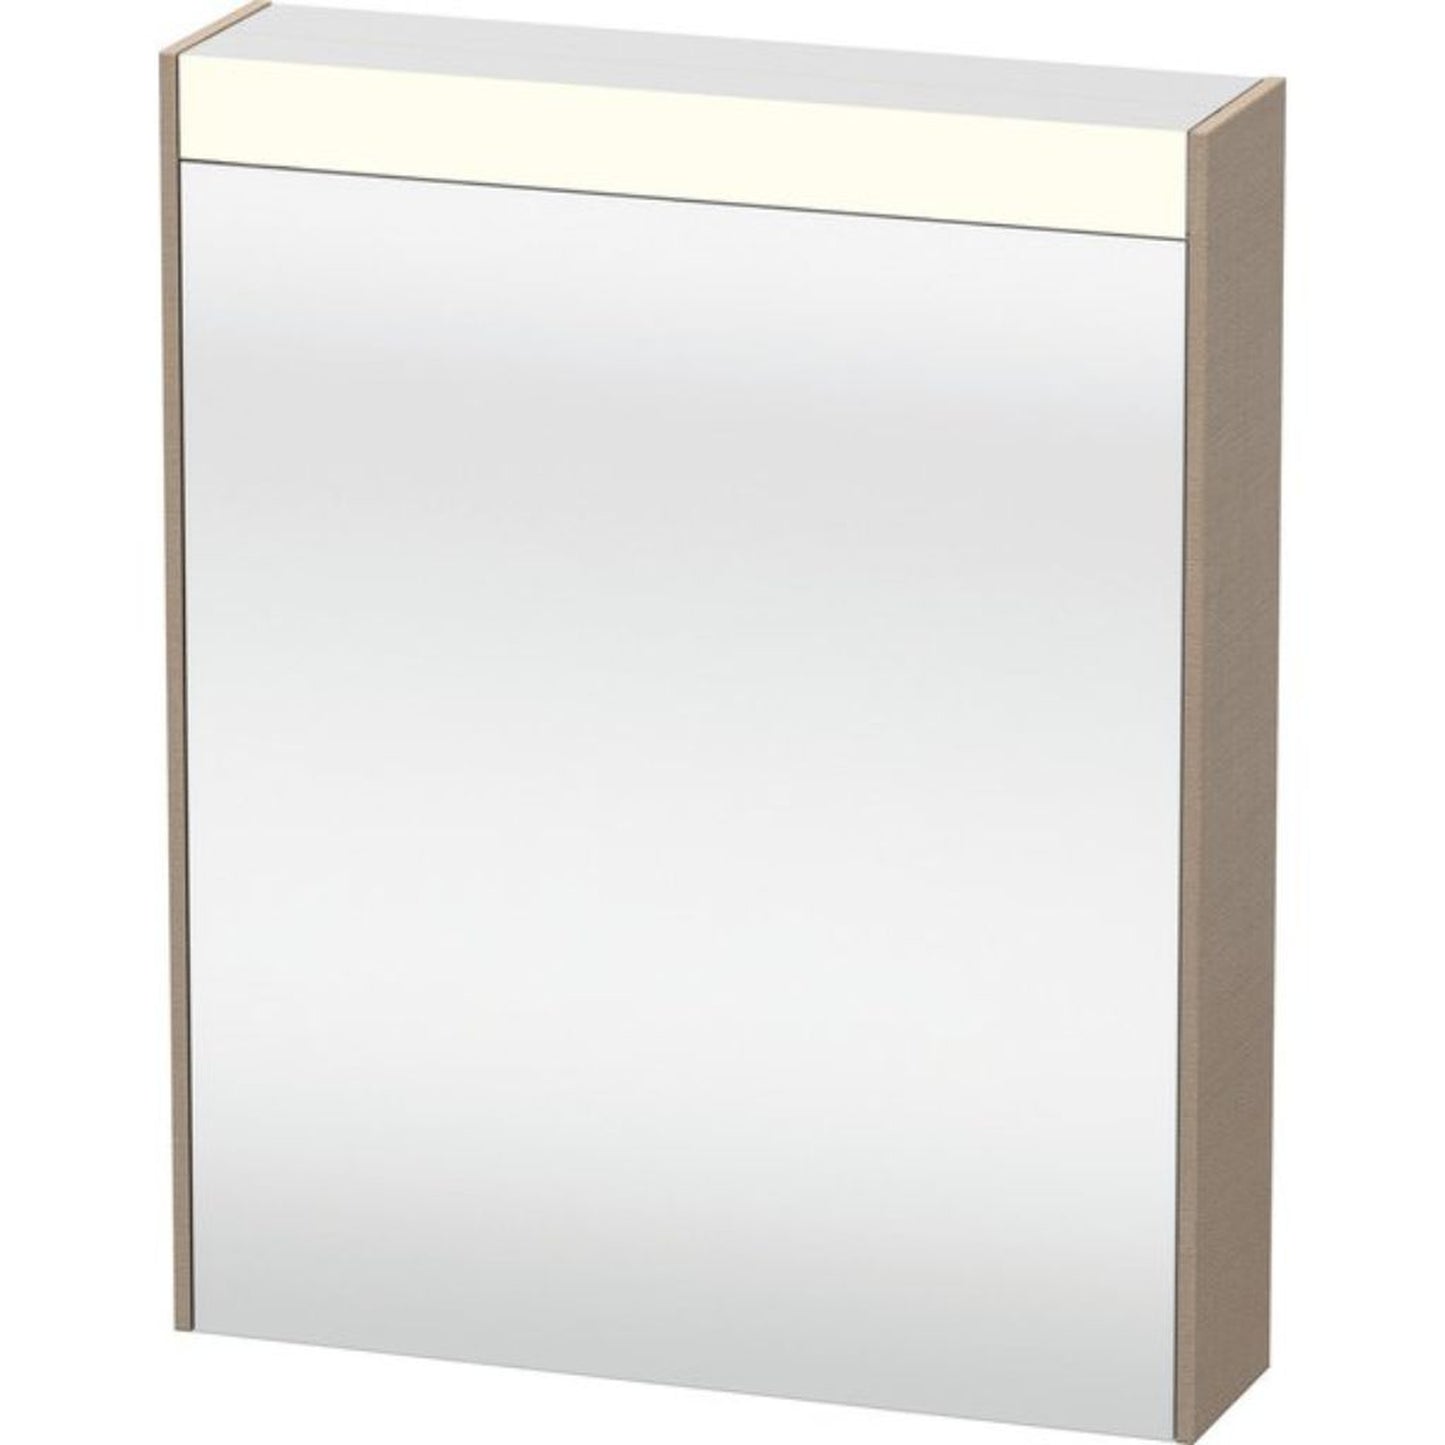 Duravit Brioso 24" x 30" x 6" Mirror With Right Hinge Cabinet and Lighting Linen